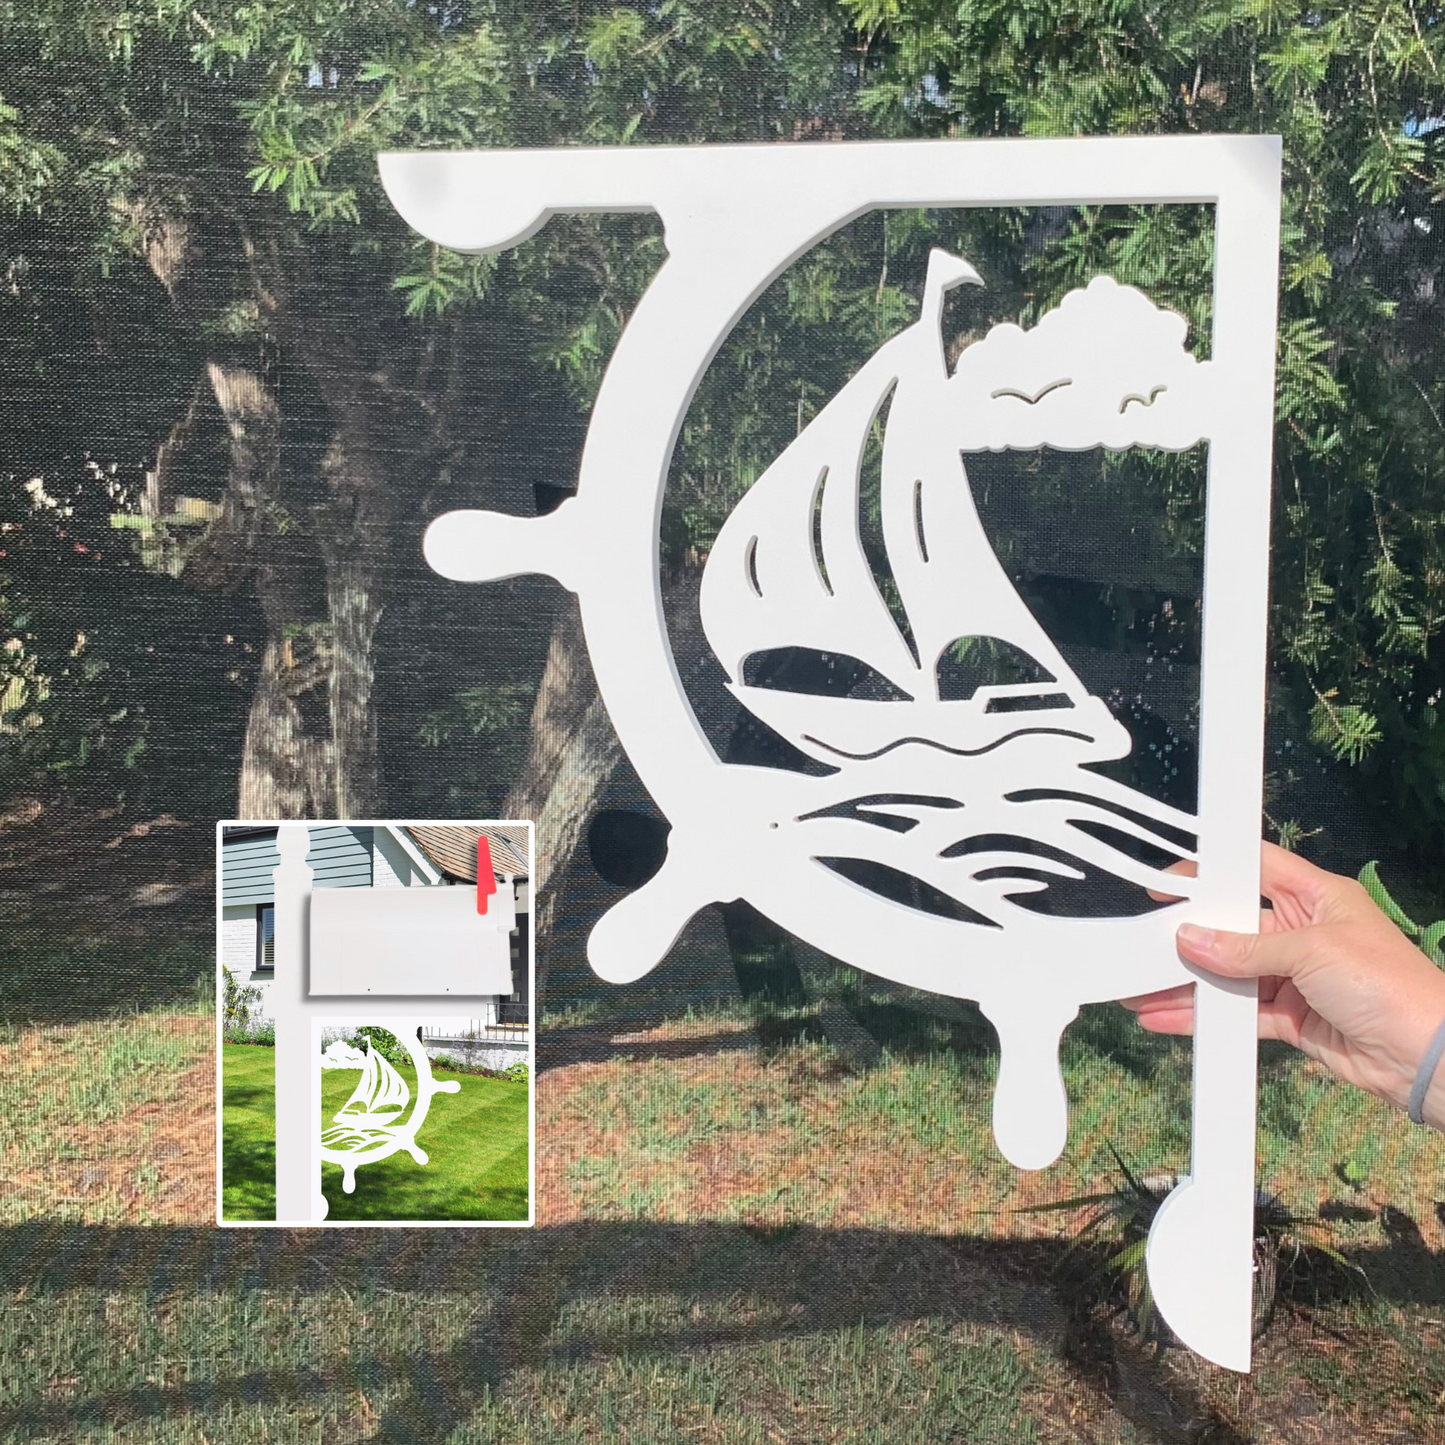 Mailbox Bracket - Ship's Wheel with Sailboat Large 16x21 inch, Custom Mailbox, Coastal, Tropical, Bracket, Outdoor Decor, Mailbox & Post Not Included (Copy)